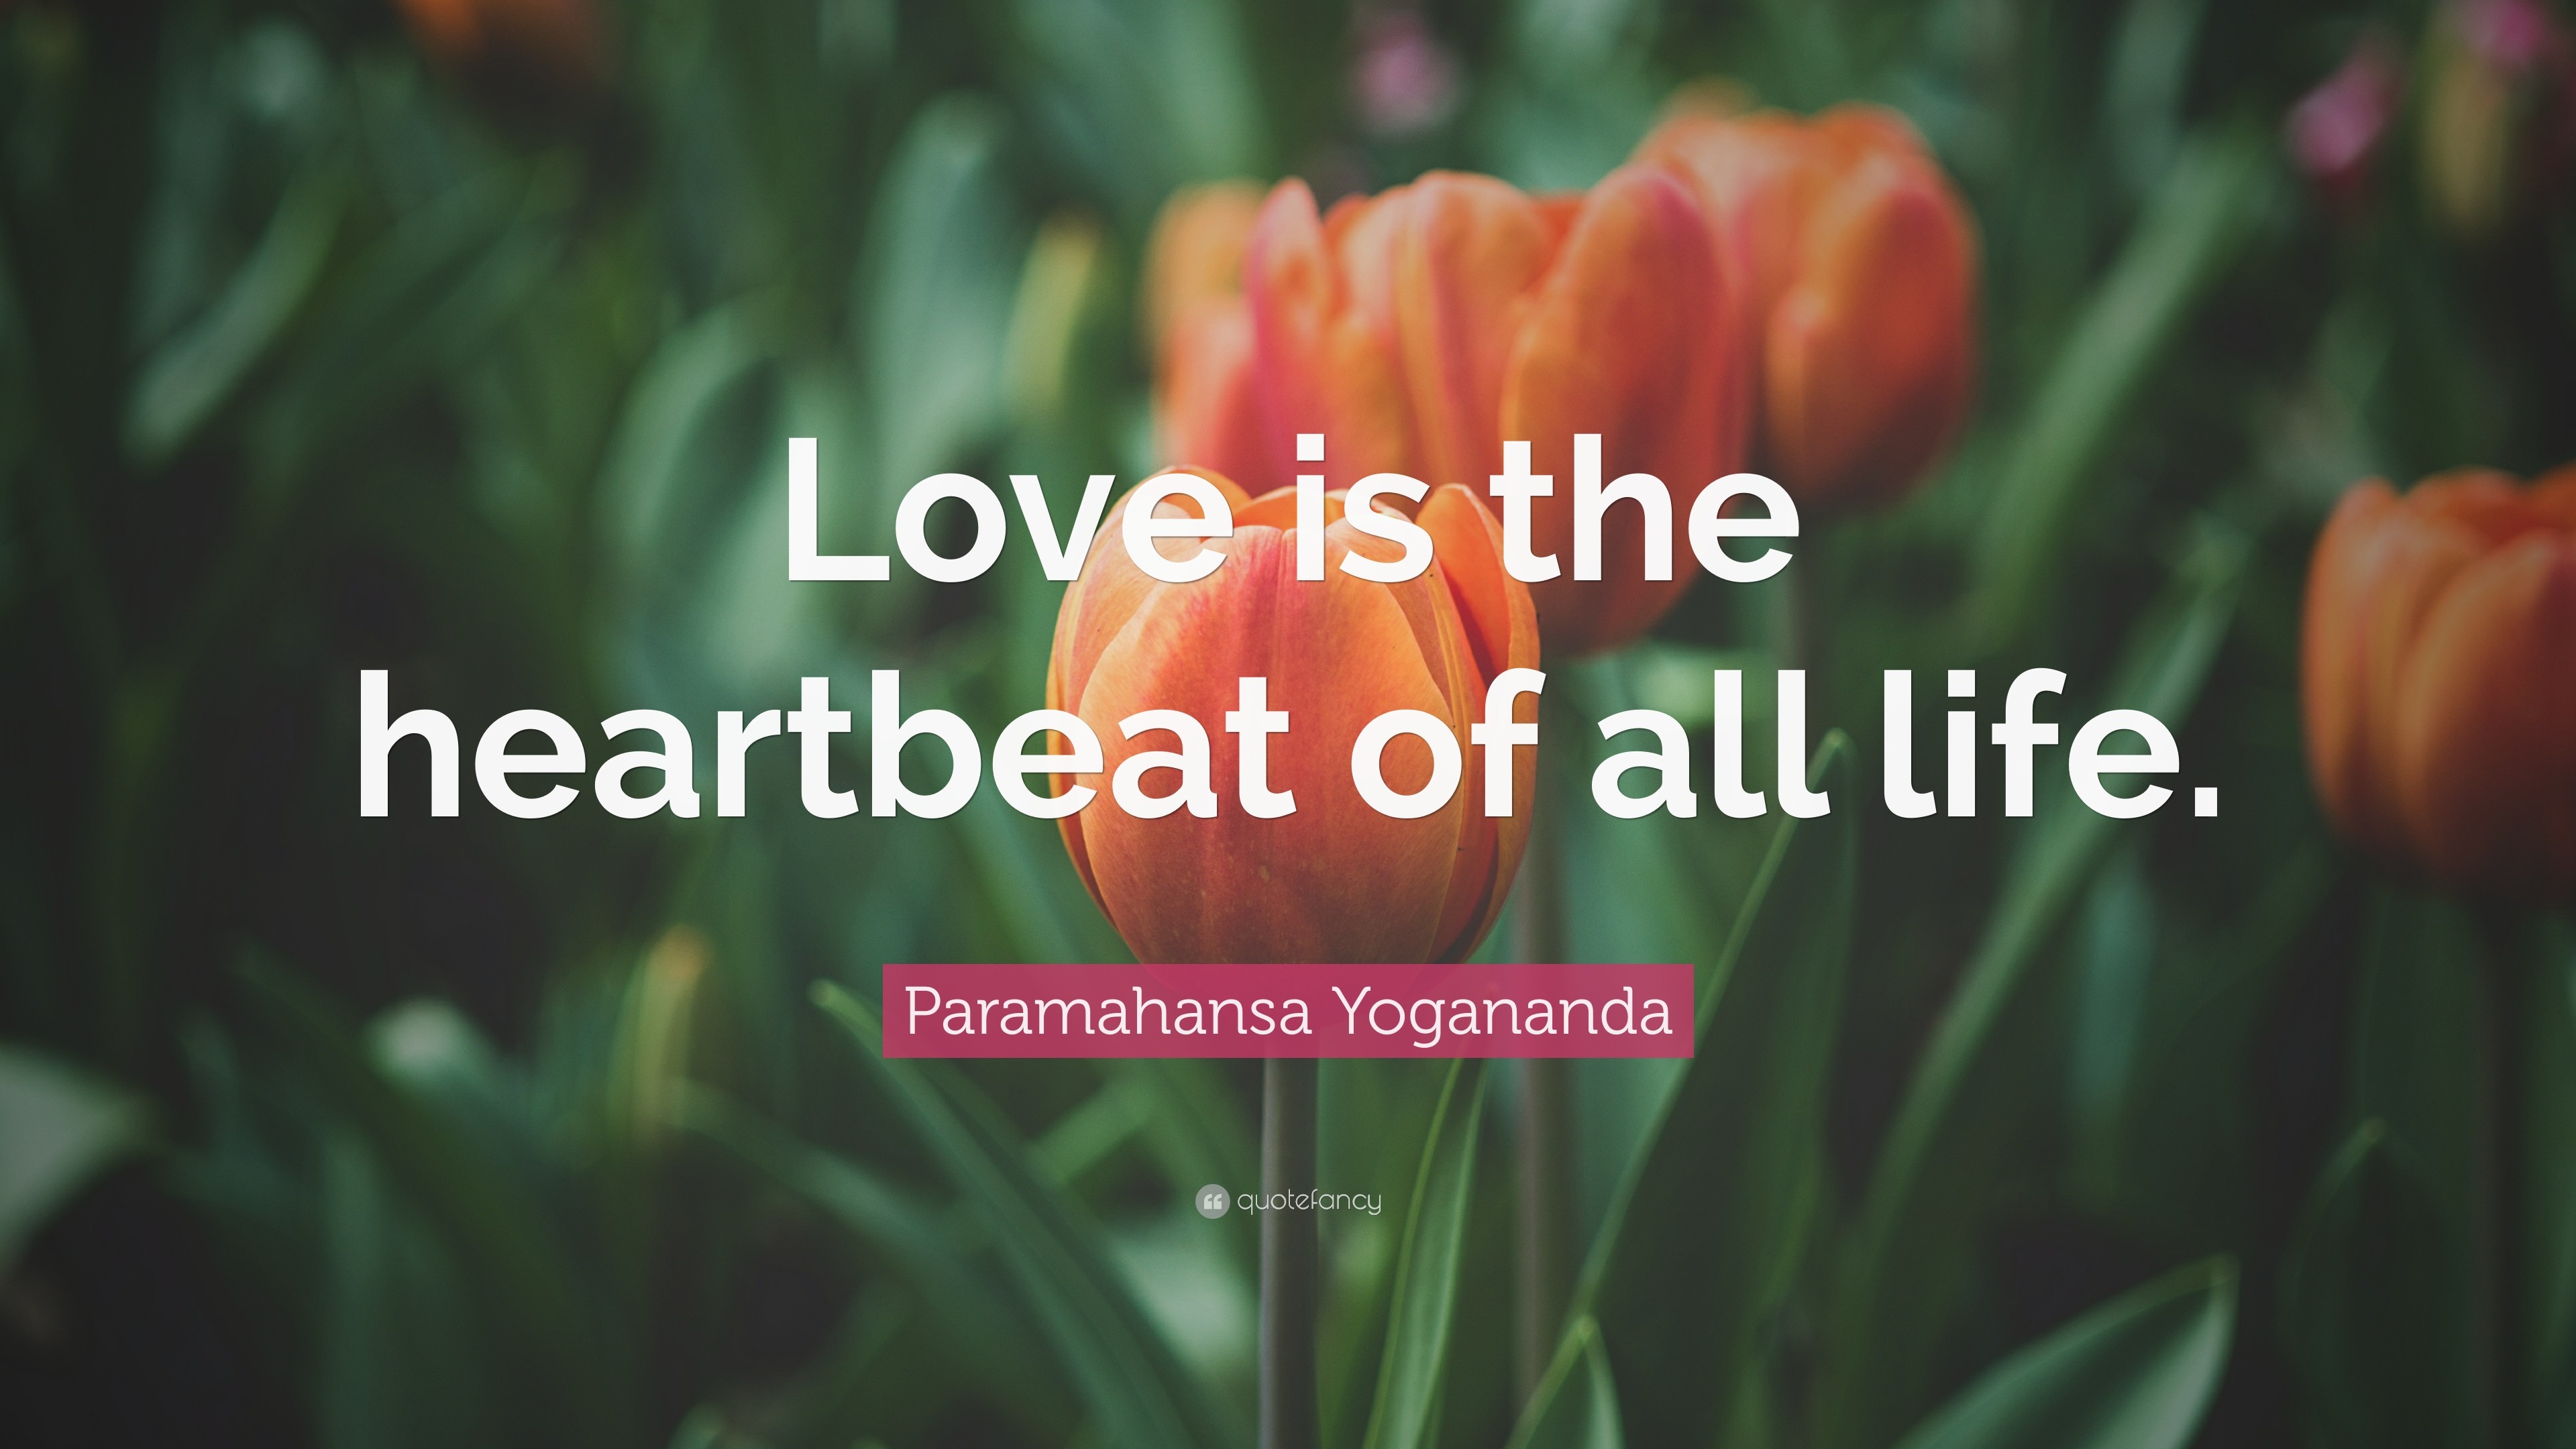 3840x2160 Paramahansa Yogananda Quote: “Love is the heartbeat of all life.”